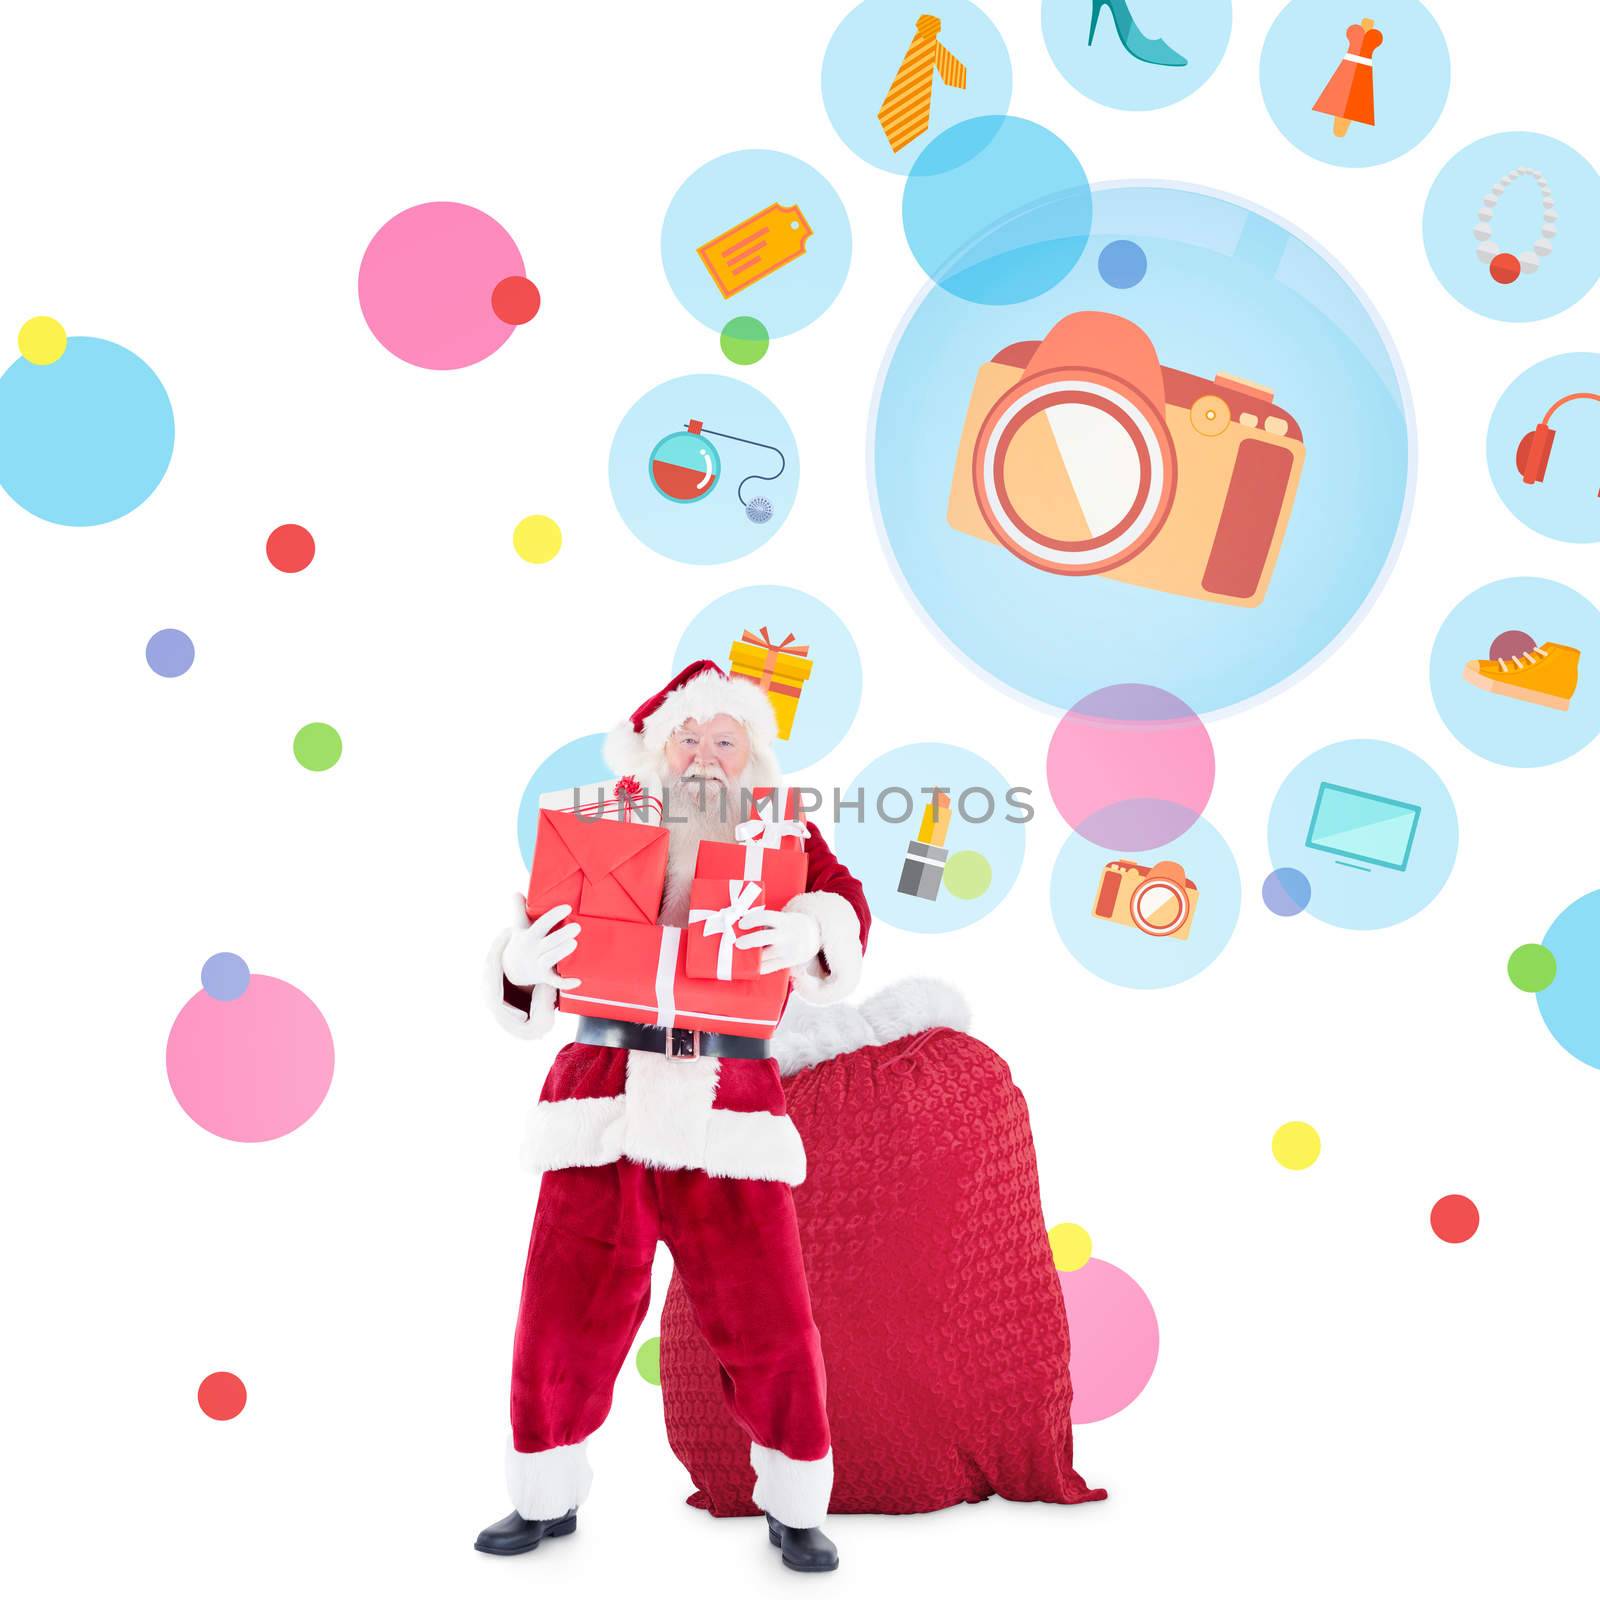 Santa holding pile of gifts against dot pattern